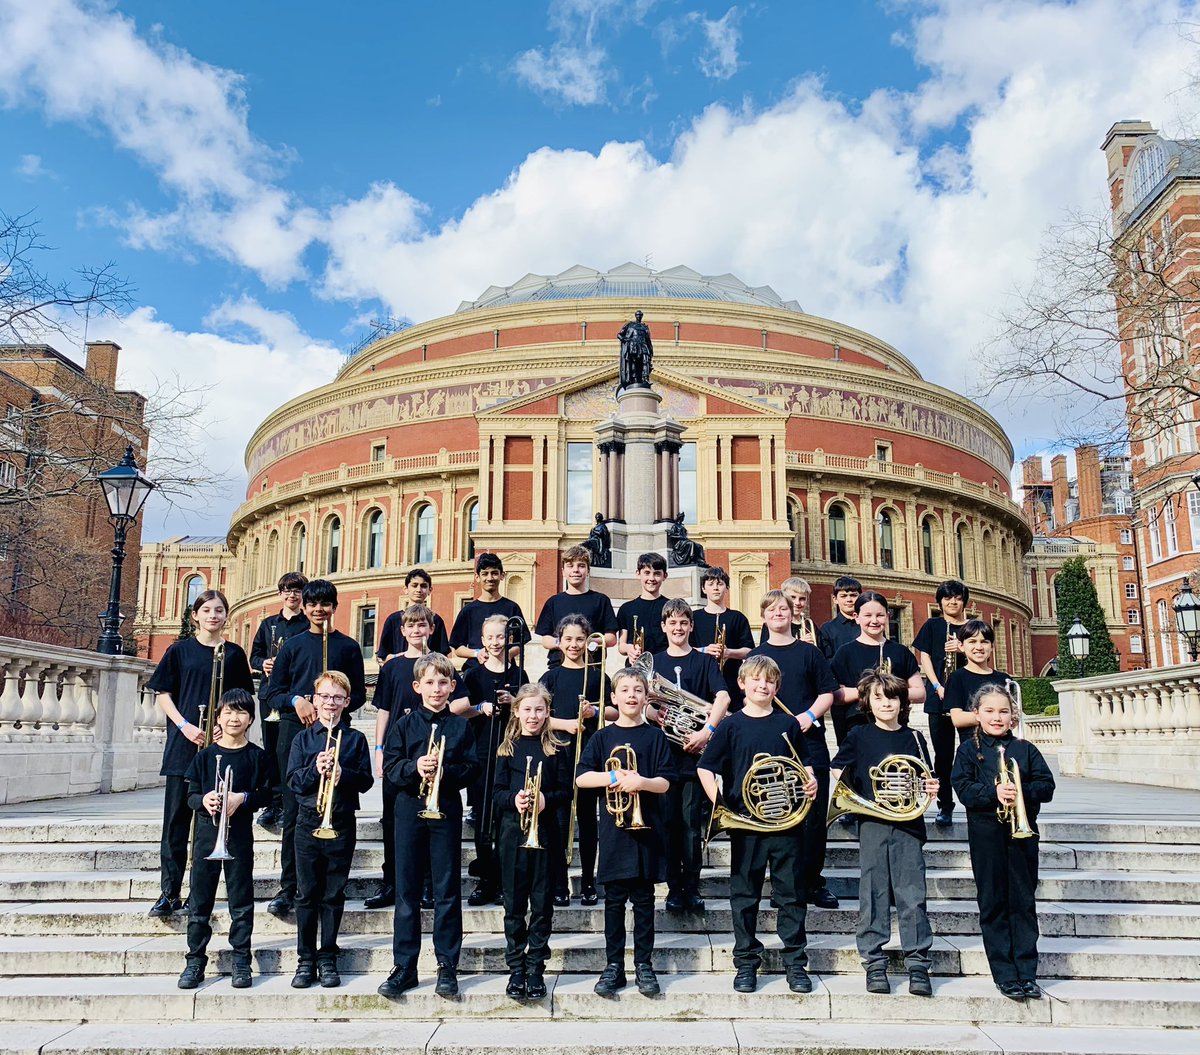 Say hello to Brass Roots at the @RoyalAlbertHall 🎺🎺 Rehearsal done and they did us proud. Looking forward to the concert now. Thanks once again to @BucksMusicTrust for the invitation! @BrassFoundation @BrassBandsEng @4barsrest